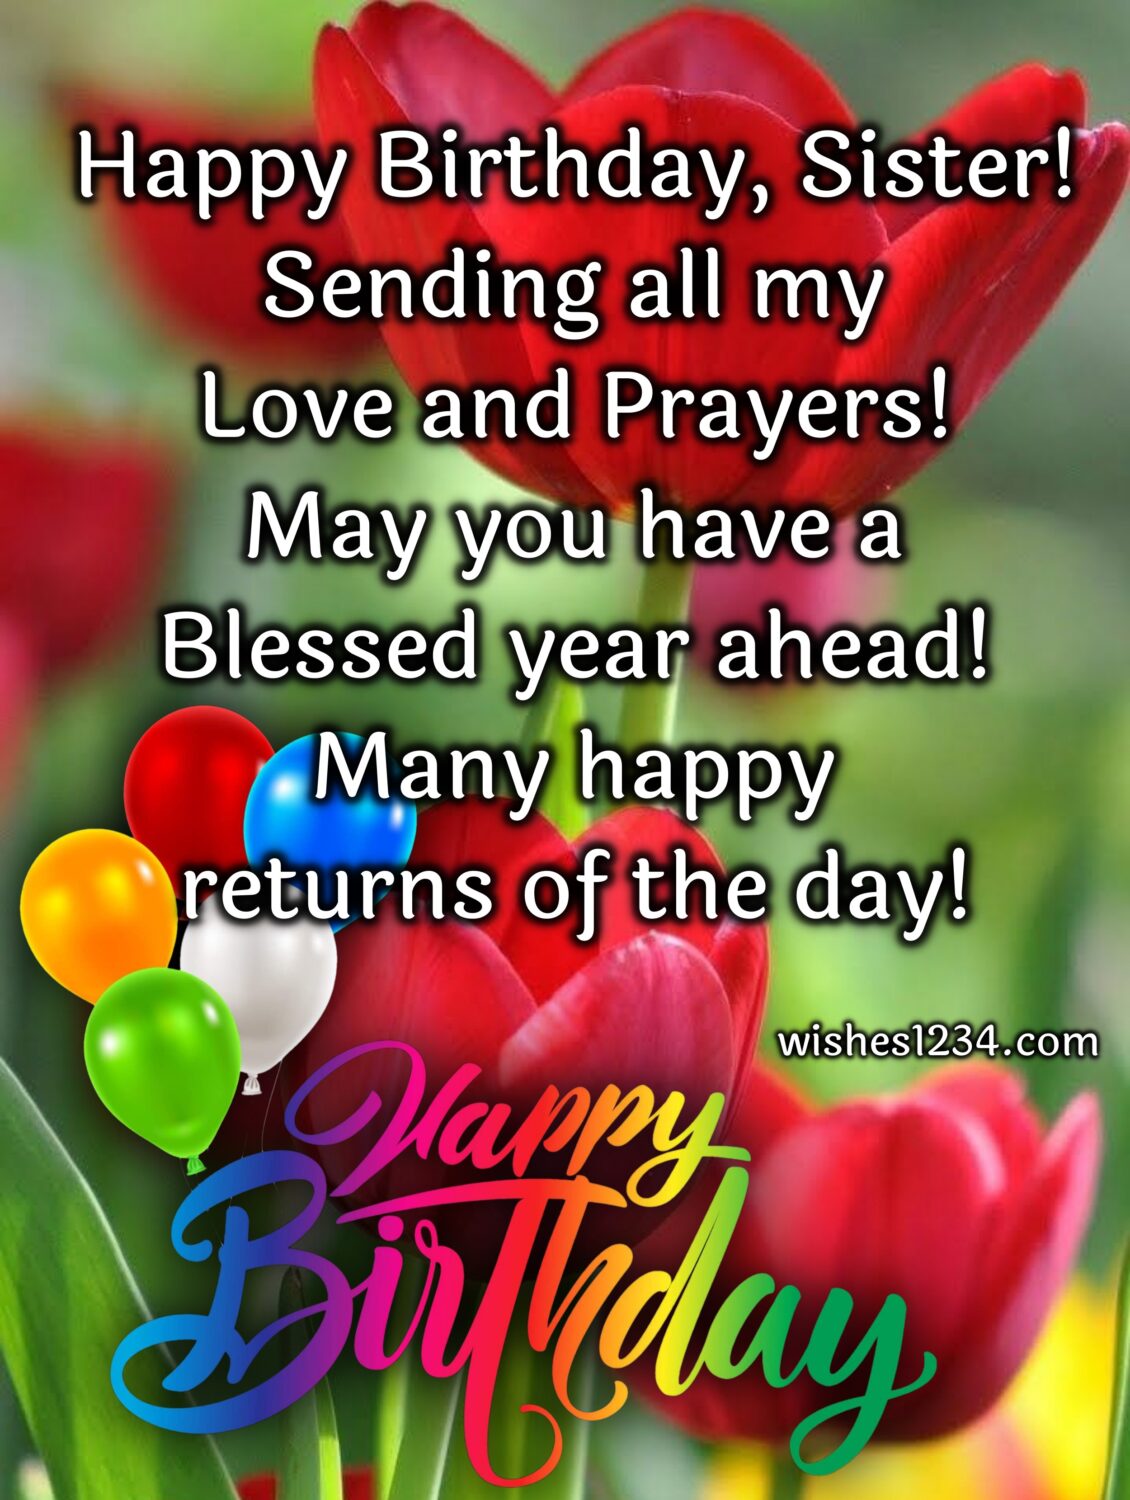 Happy birthday sister blessings with red tulips, Wishes for Sister birthday.